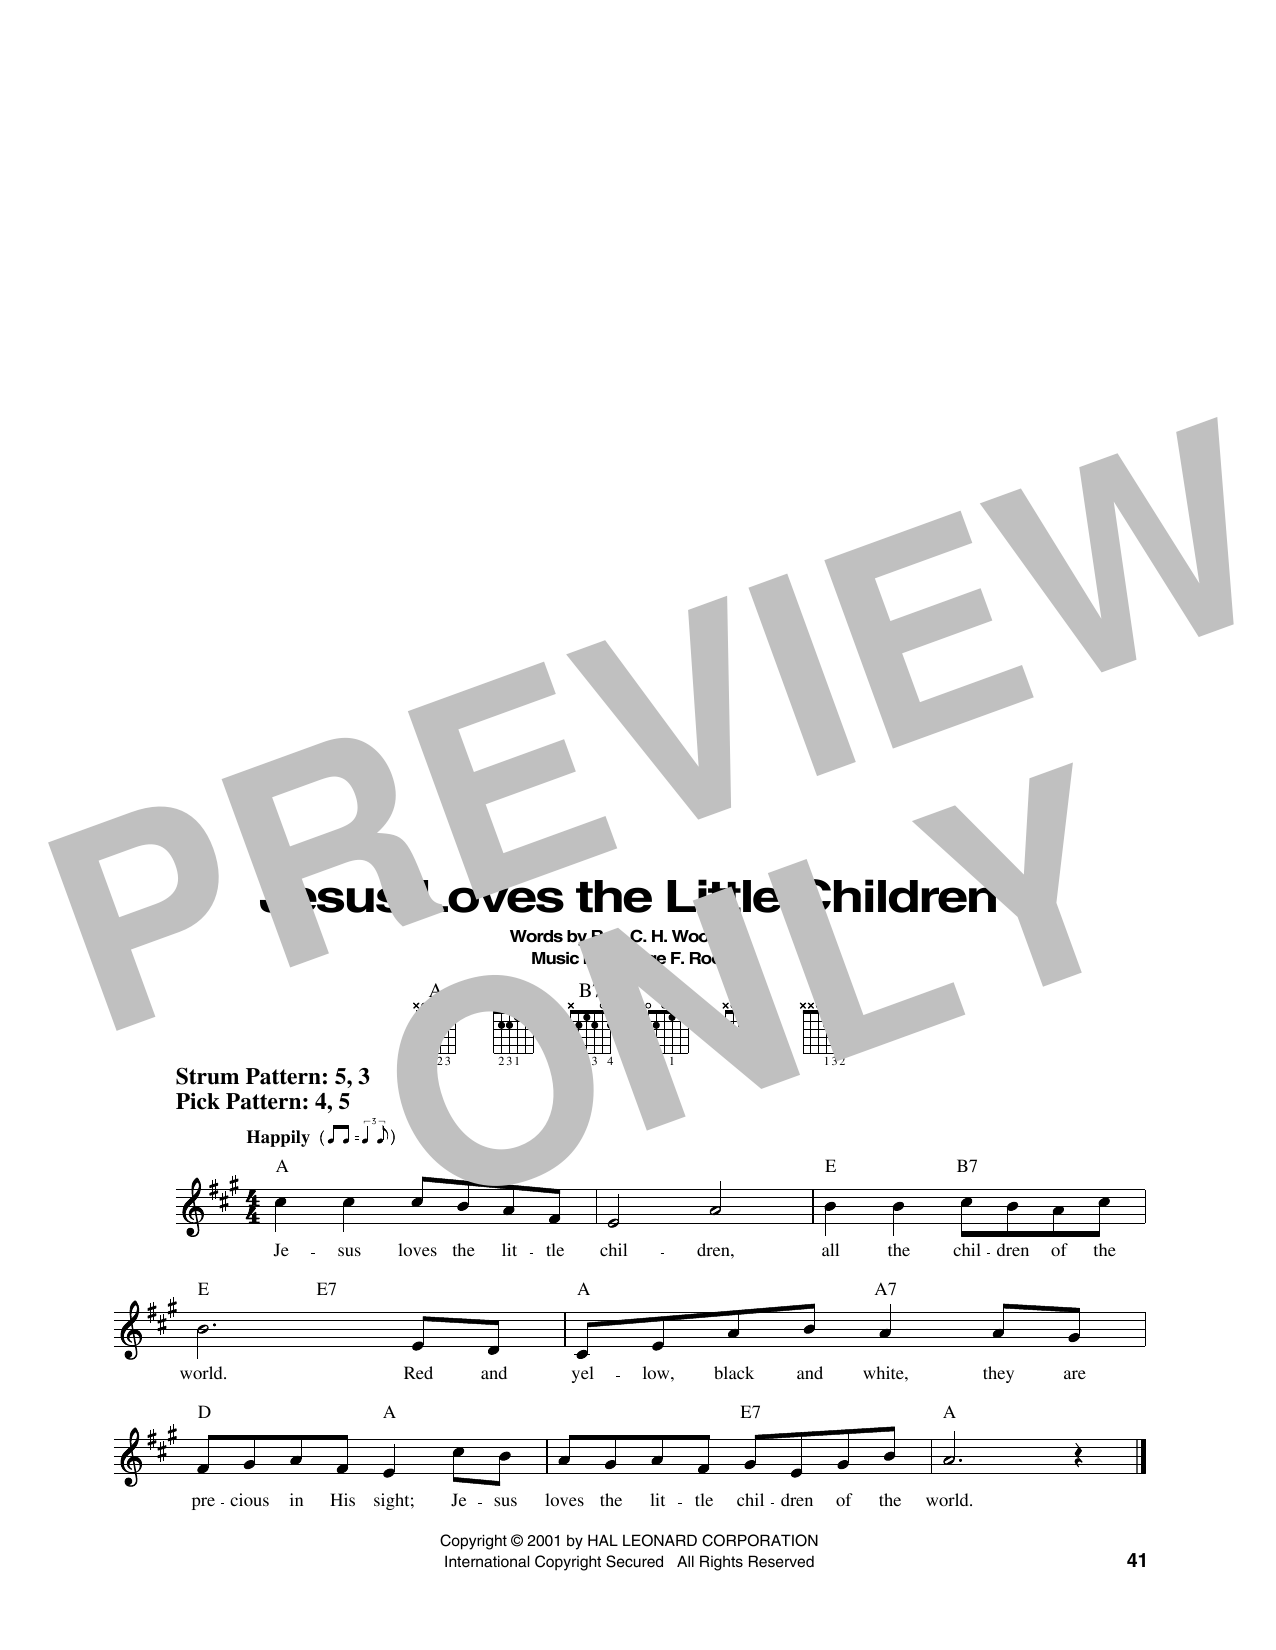 George F. Root Jesus Loves The Little Children sheet music notes printable PDF score